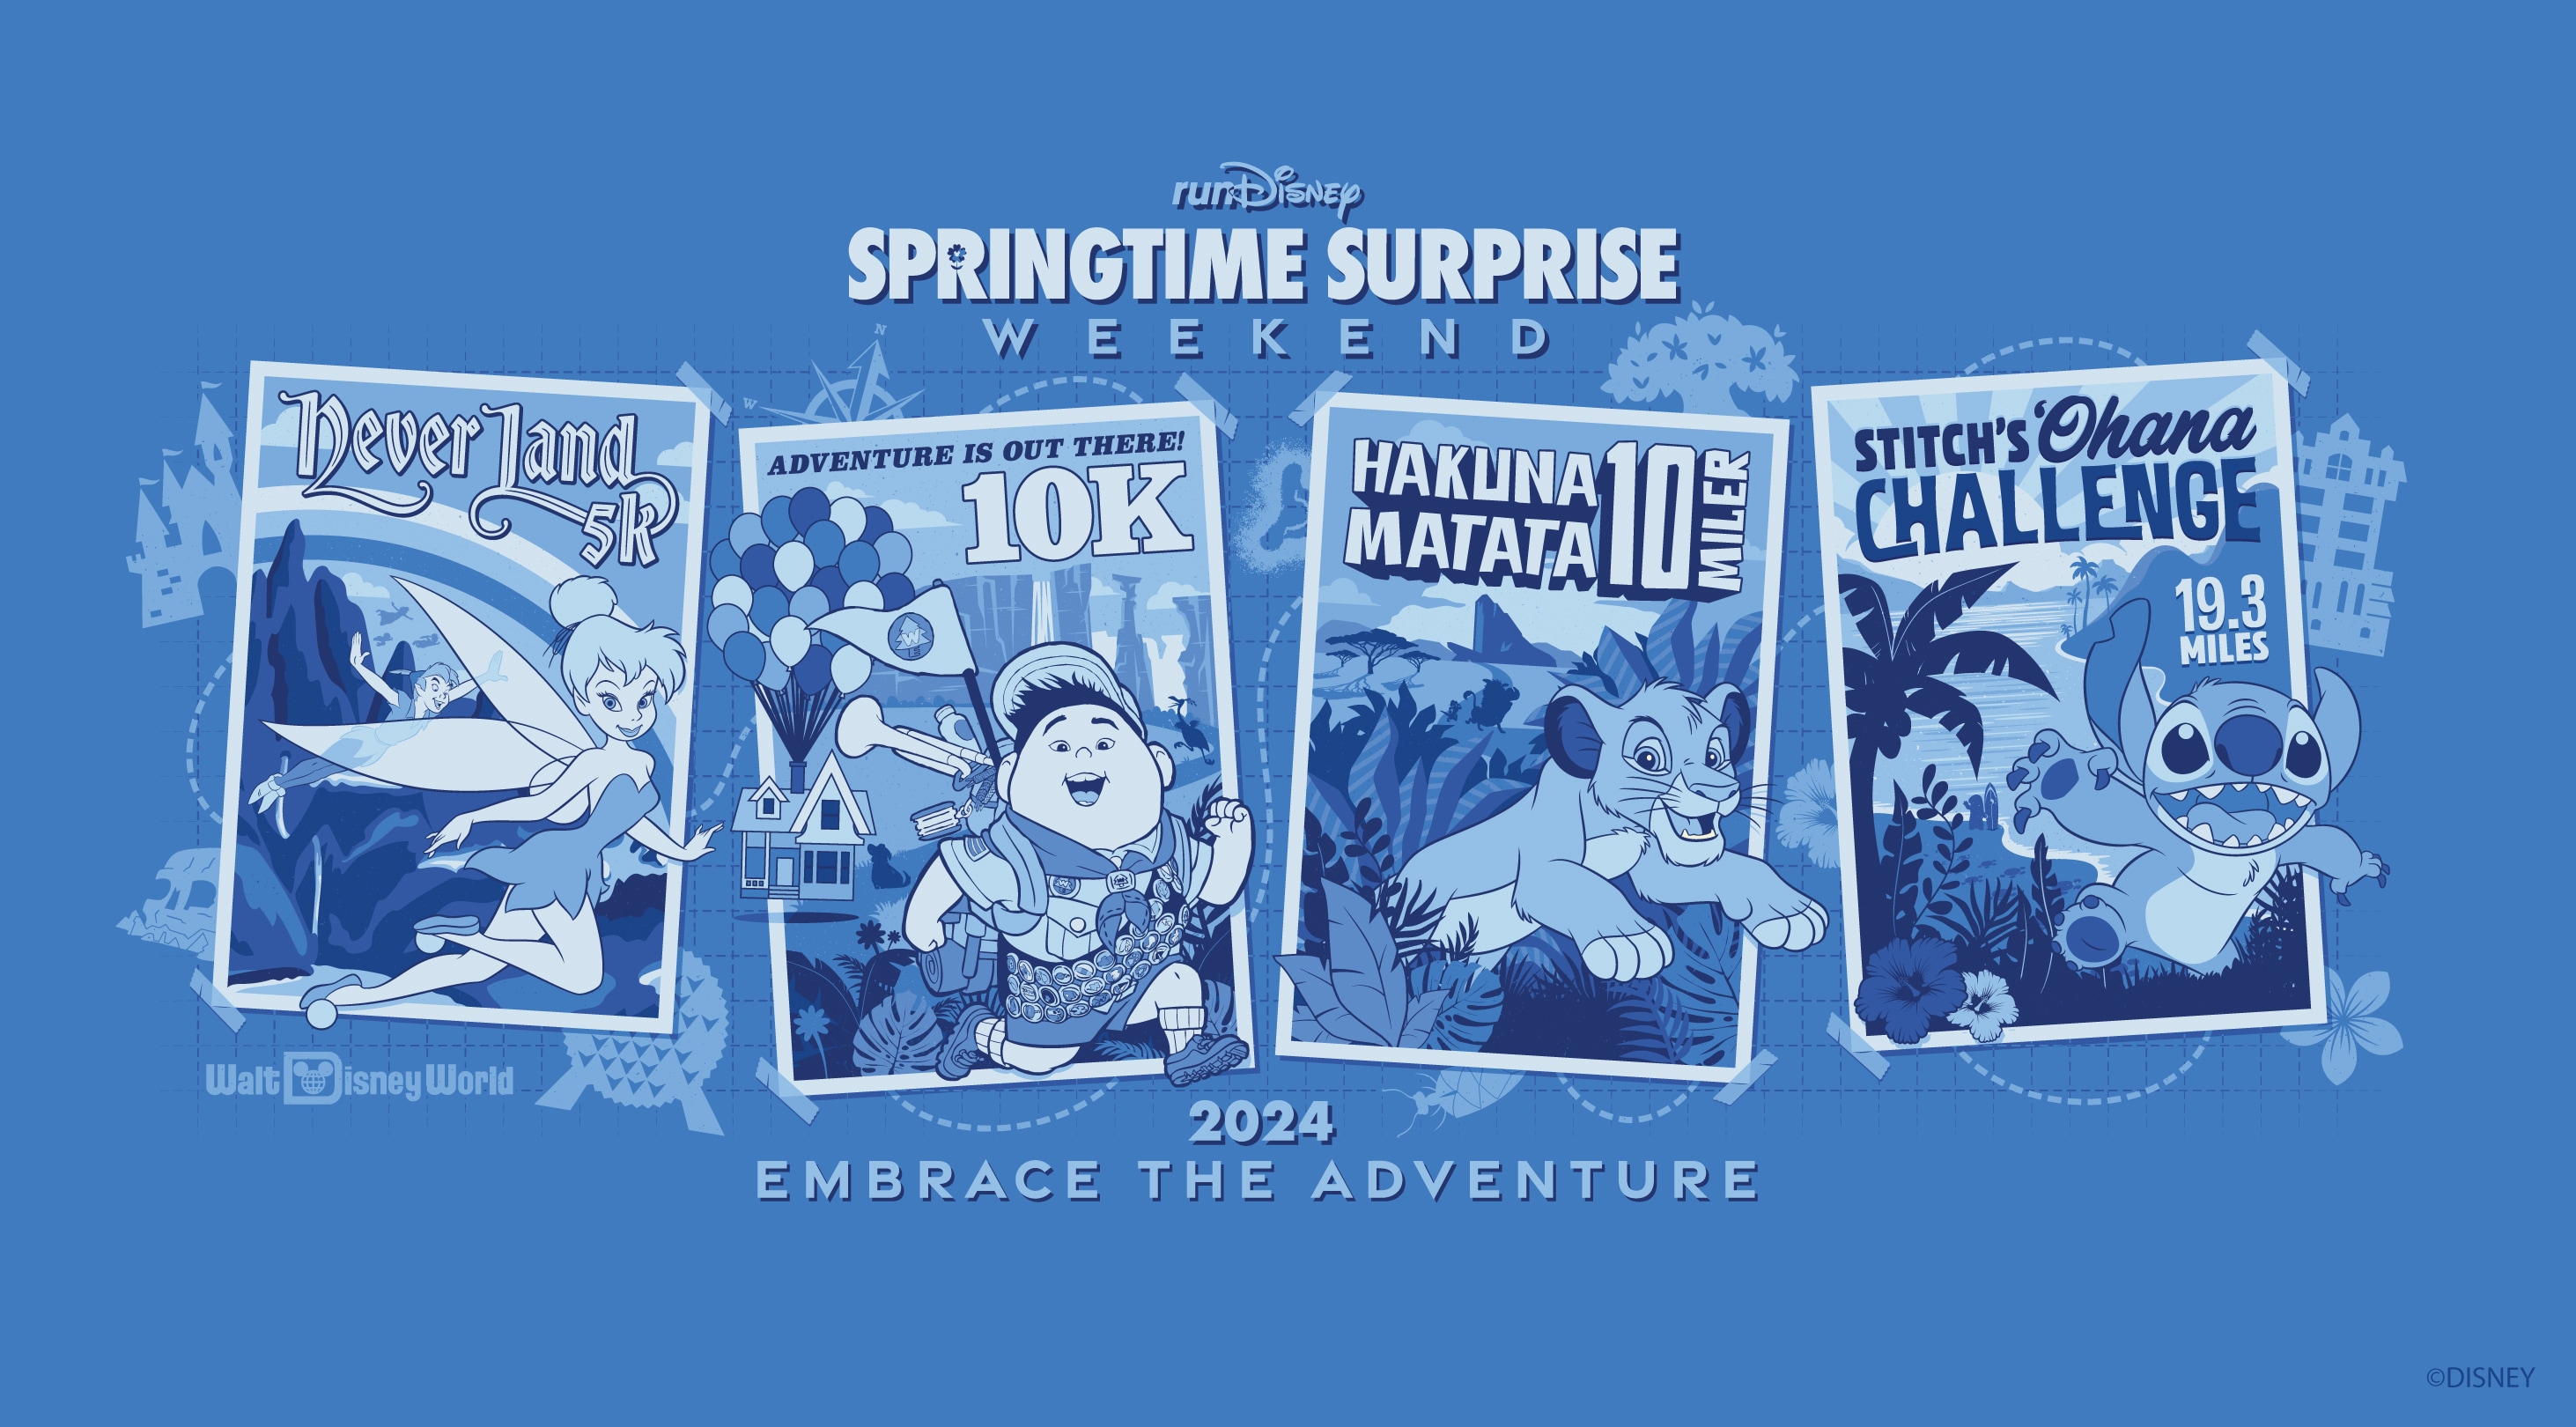 Celebrate the Spirit of Togetherness During the 2024 runDisney Springtime Surprise Weekend